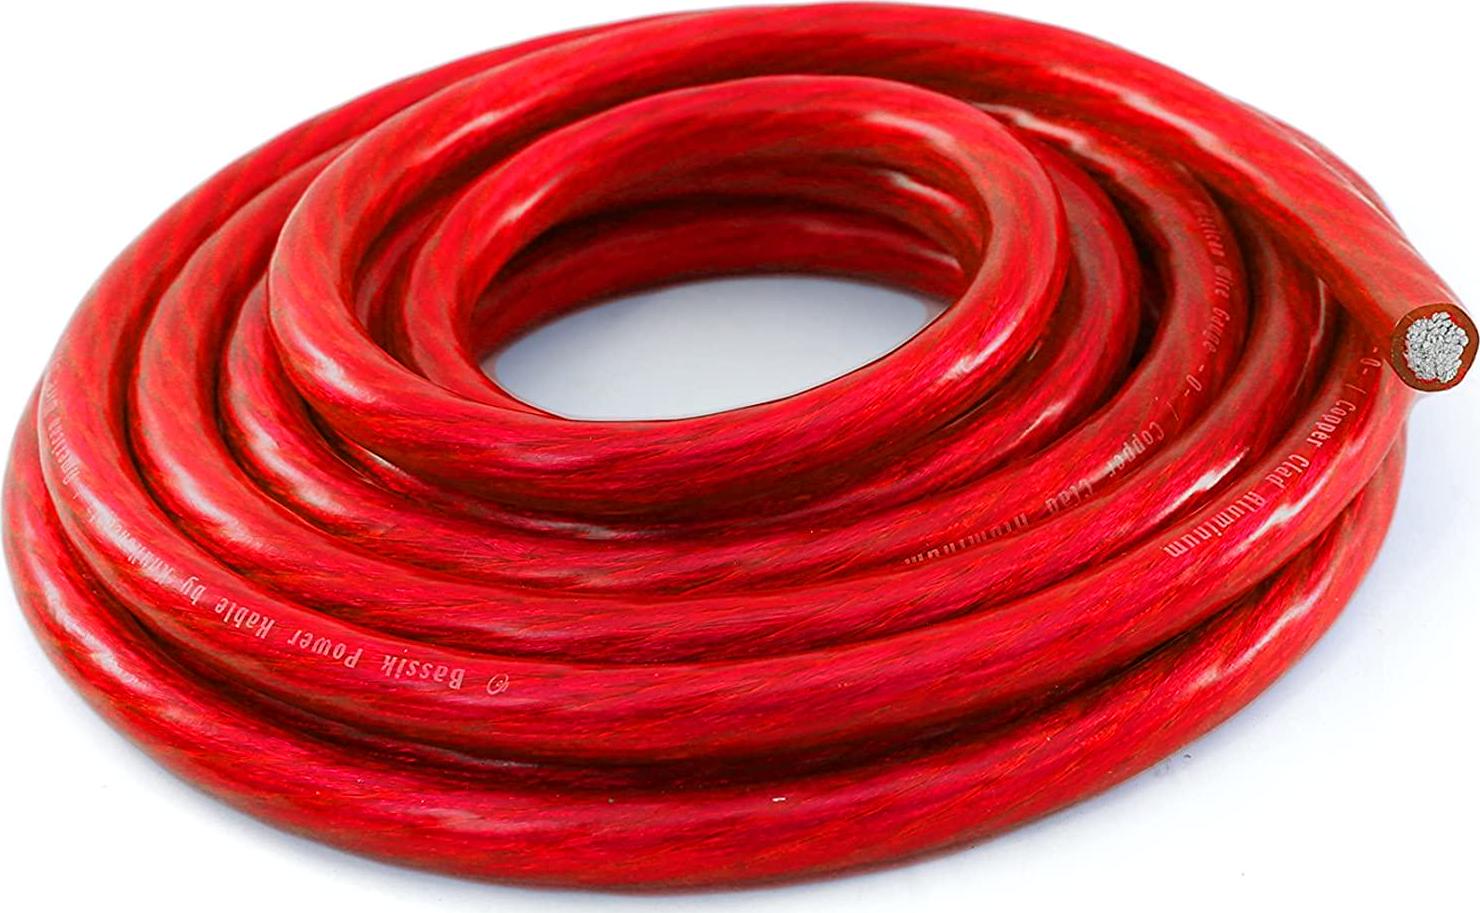 KnuKonceptz, KnuKonceptz Bassik 8 Gauge Power/Ground Wire Cable Red 25 Foot Coil